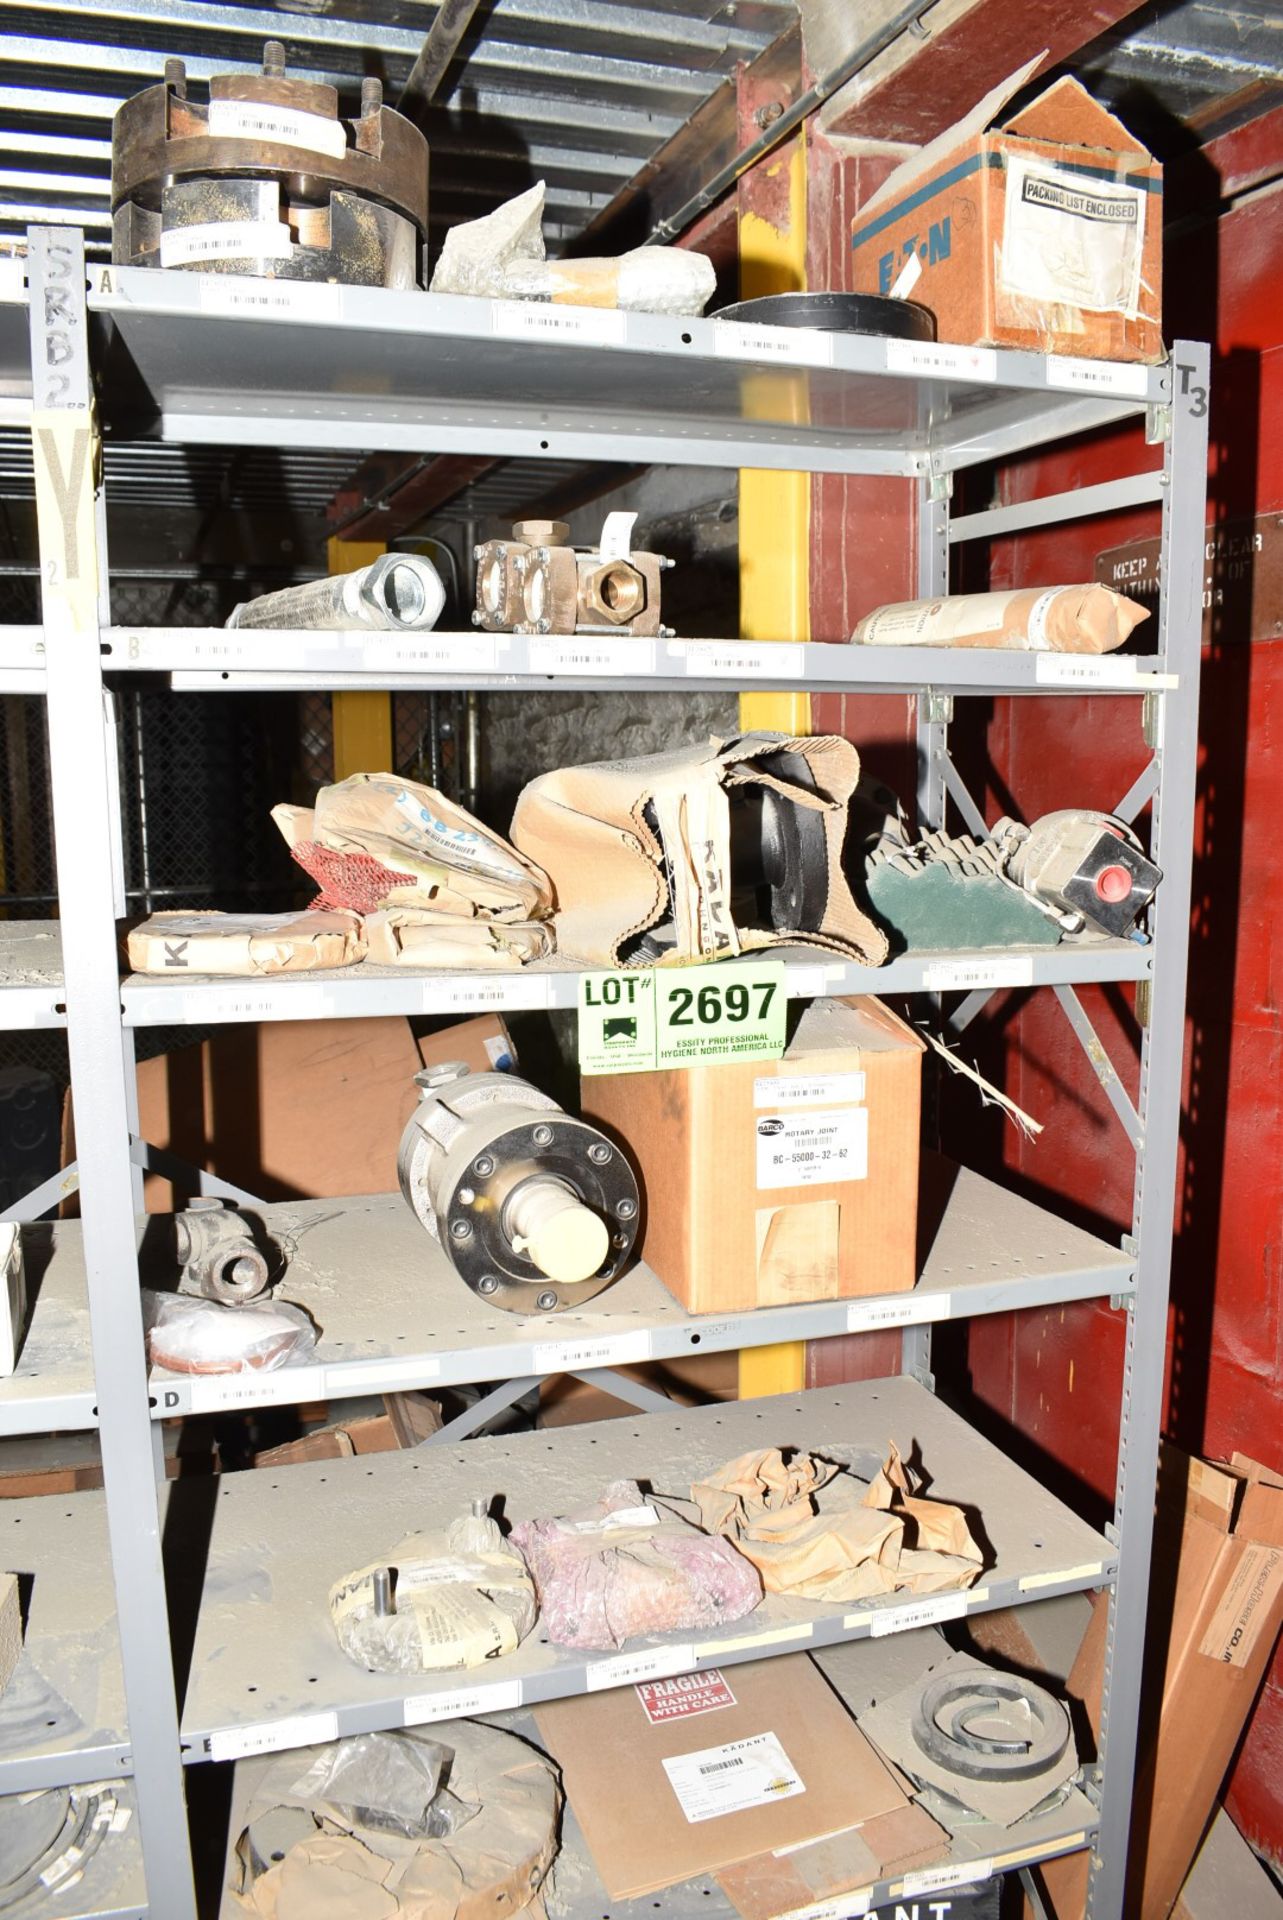 LOT/ CONTENTS OF SHELF - INCLUDING FLEX COUPLINGS, SLITTER BLADES, SPARE PARTS [RIGGING FEES FOR LOT